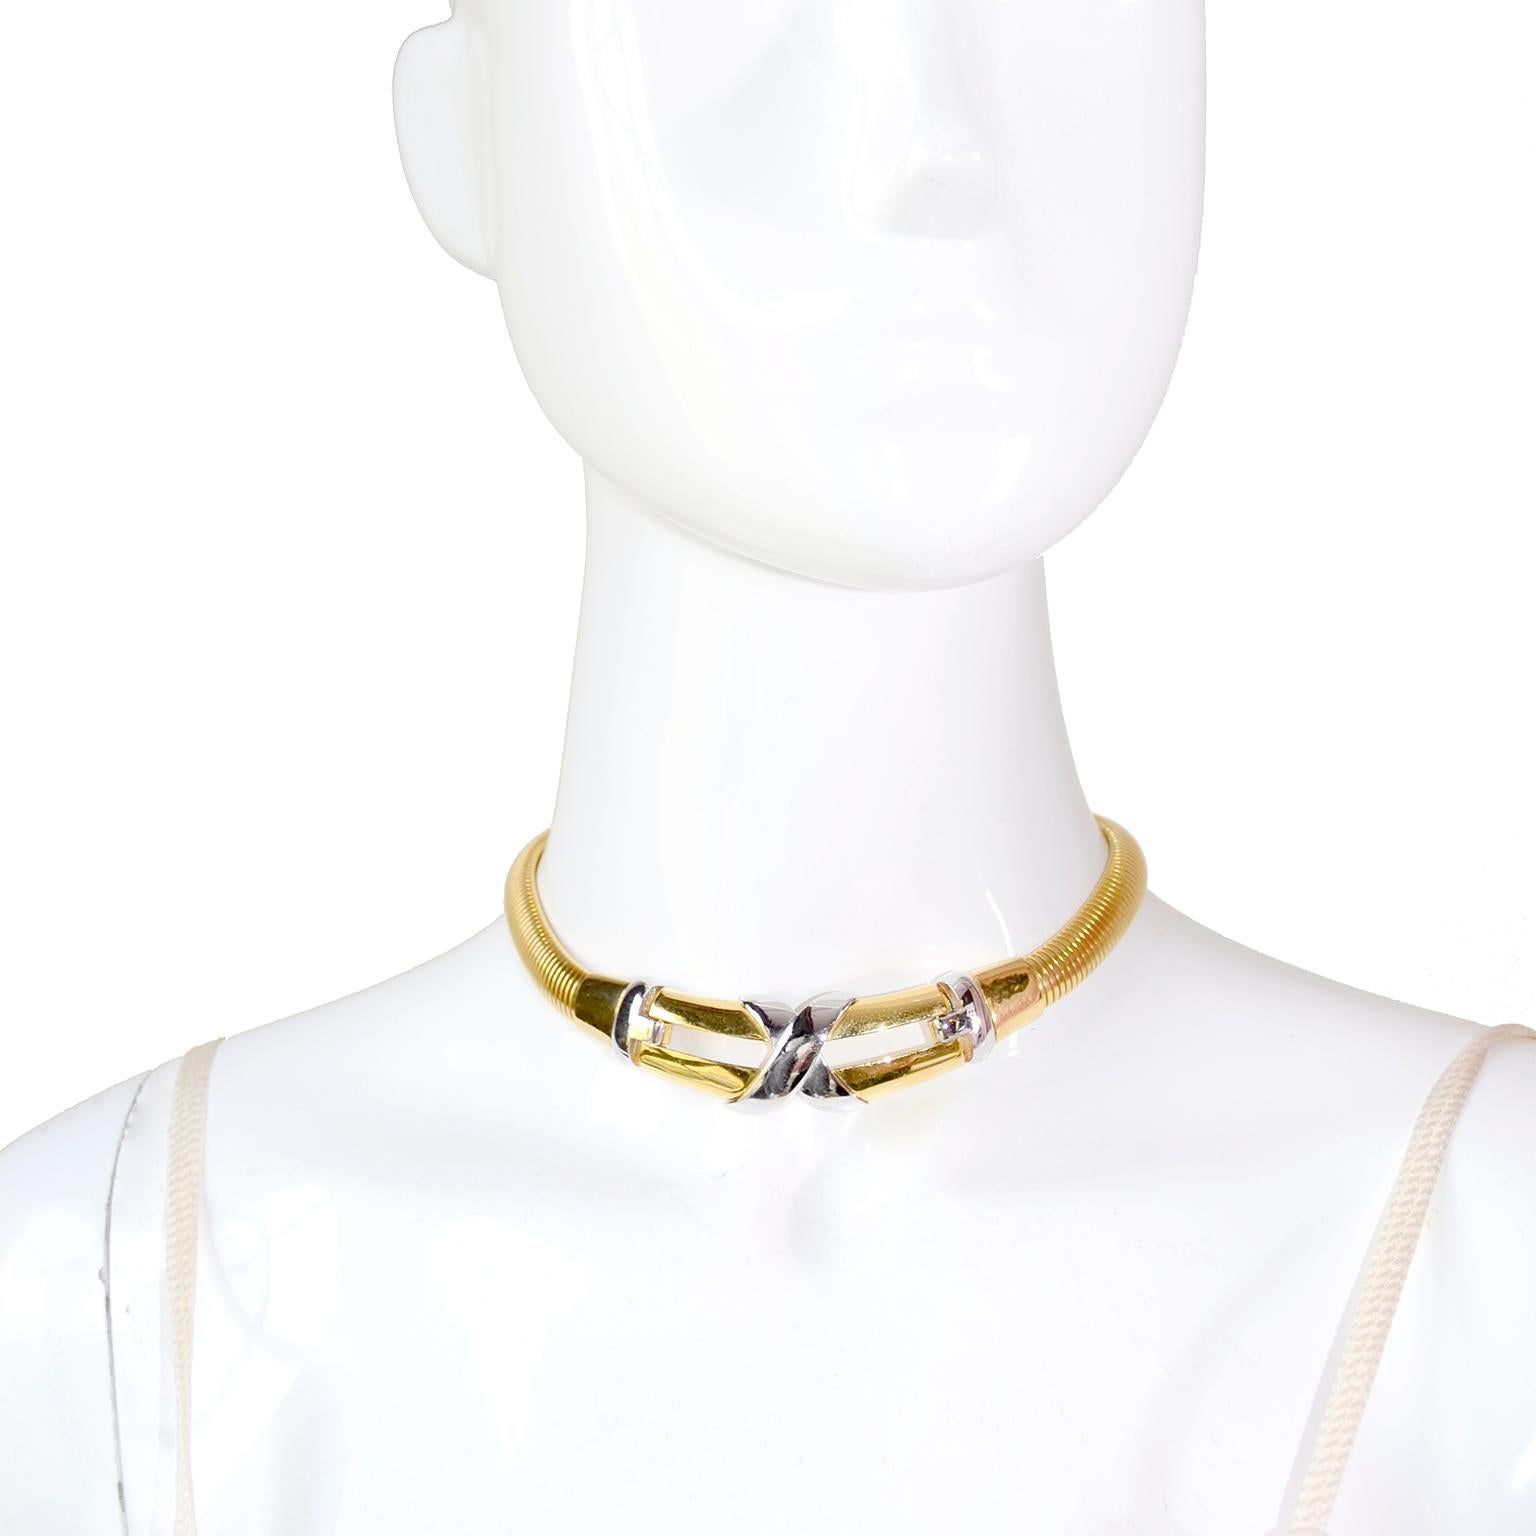 Women's 1977 Givenchy Vintage Collar Necklace in Gold and Silver Tone